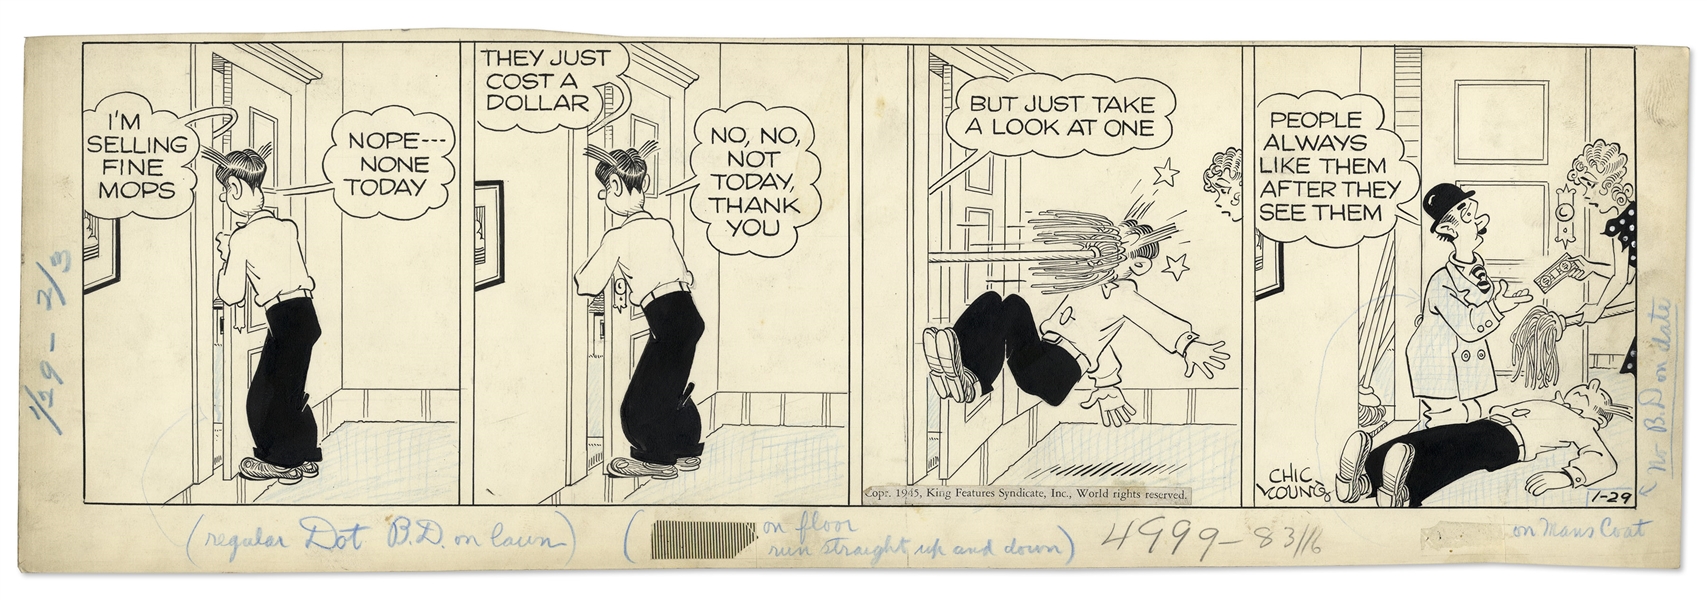 Chic Young Hand-Drawn ''Blondie'' Comic Strip From 1945 Featuring Blondie & Dagwood -- Titled, ''A New Point in Selling''